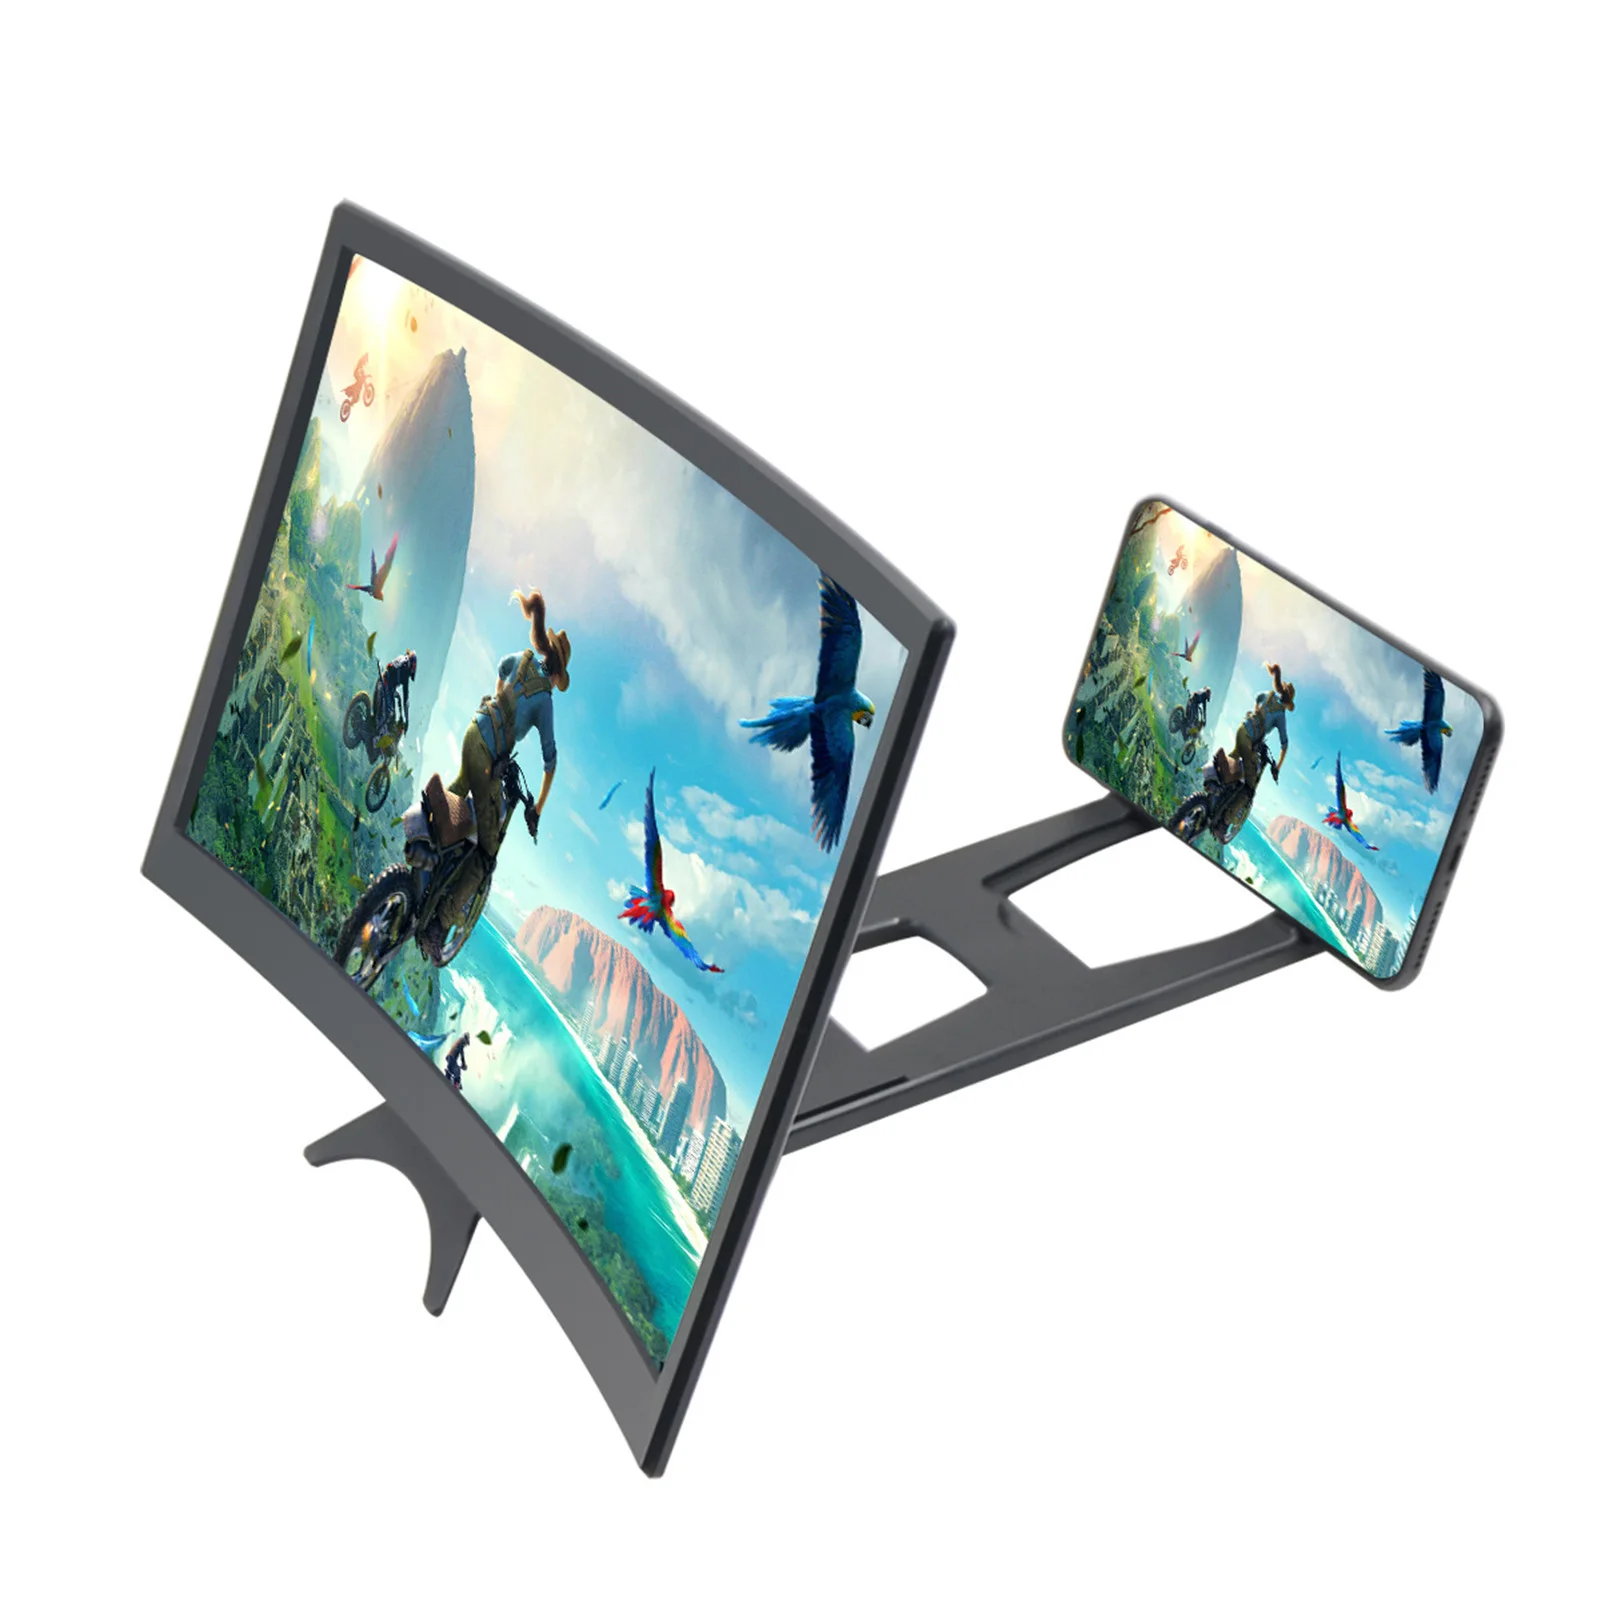 

14 Inch Large Screen 3D HD Amplifier Curved Screen Mobile Phone Screen Magnifier For Smartphone Stand Enlarge